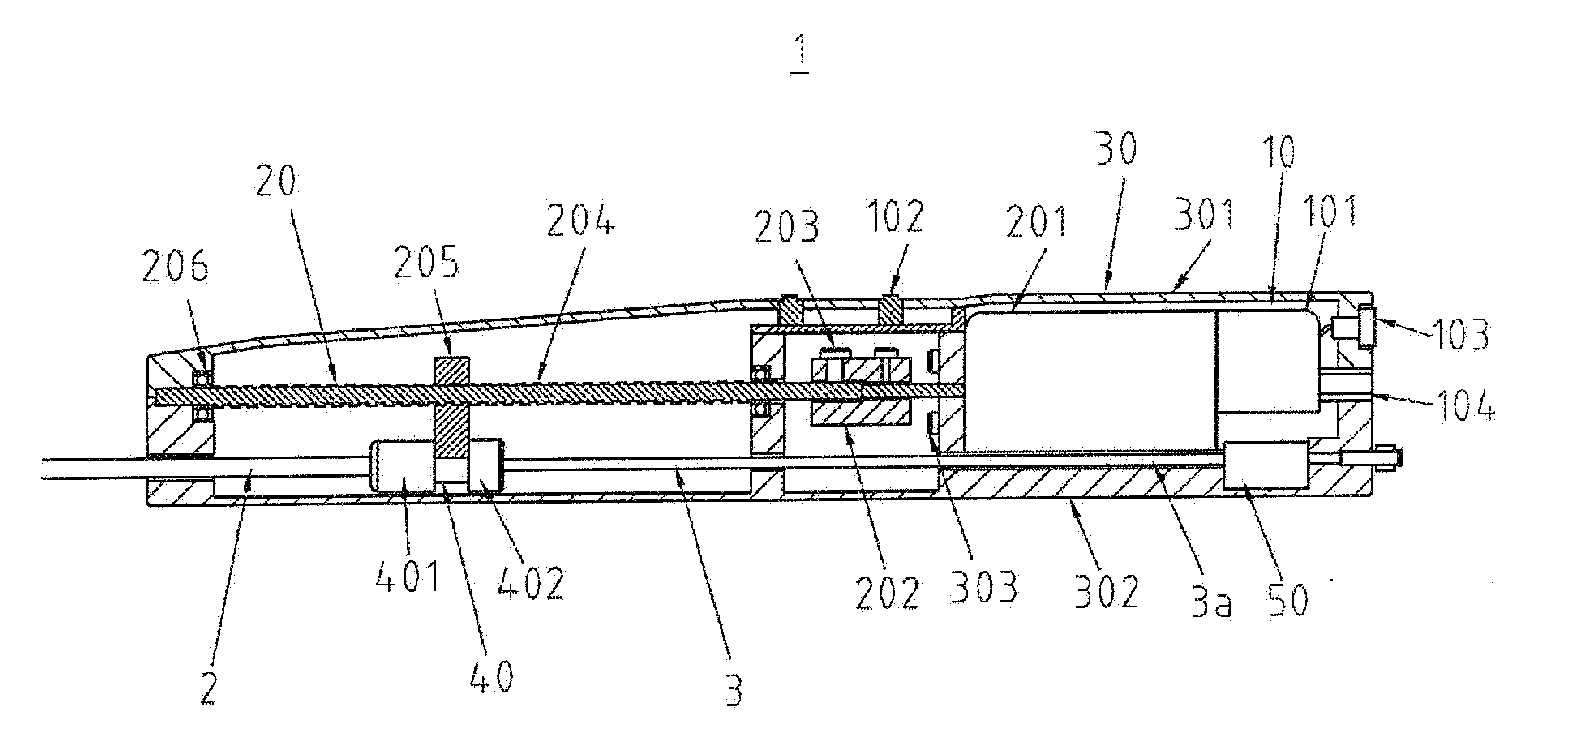 Electric handle for implant delivery and delivery system